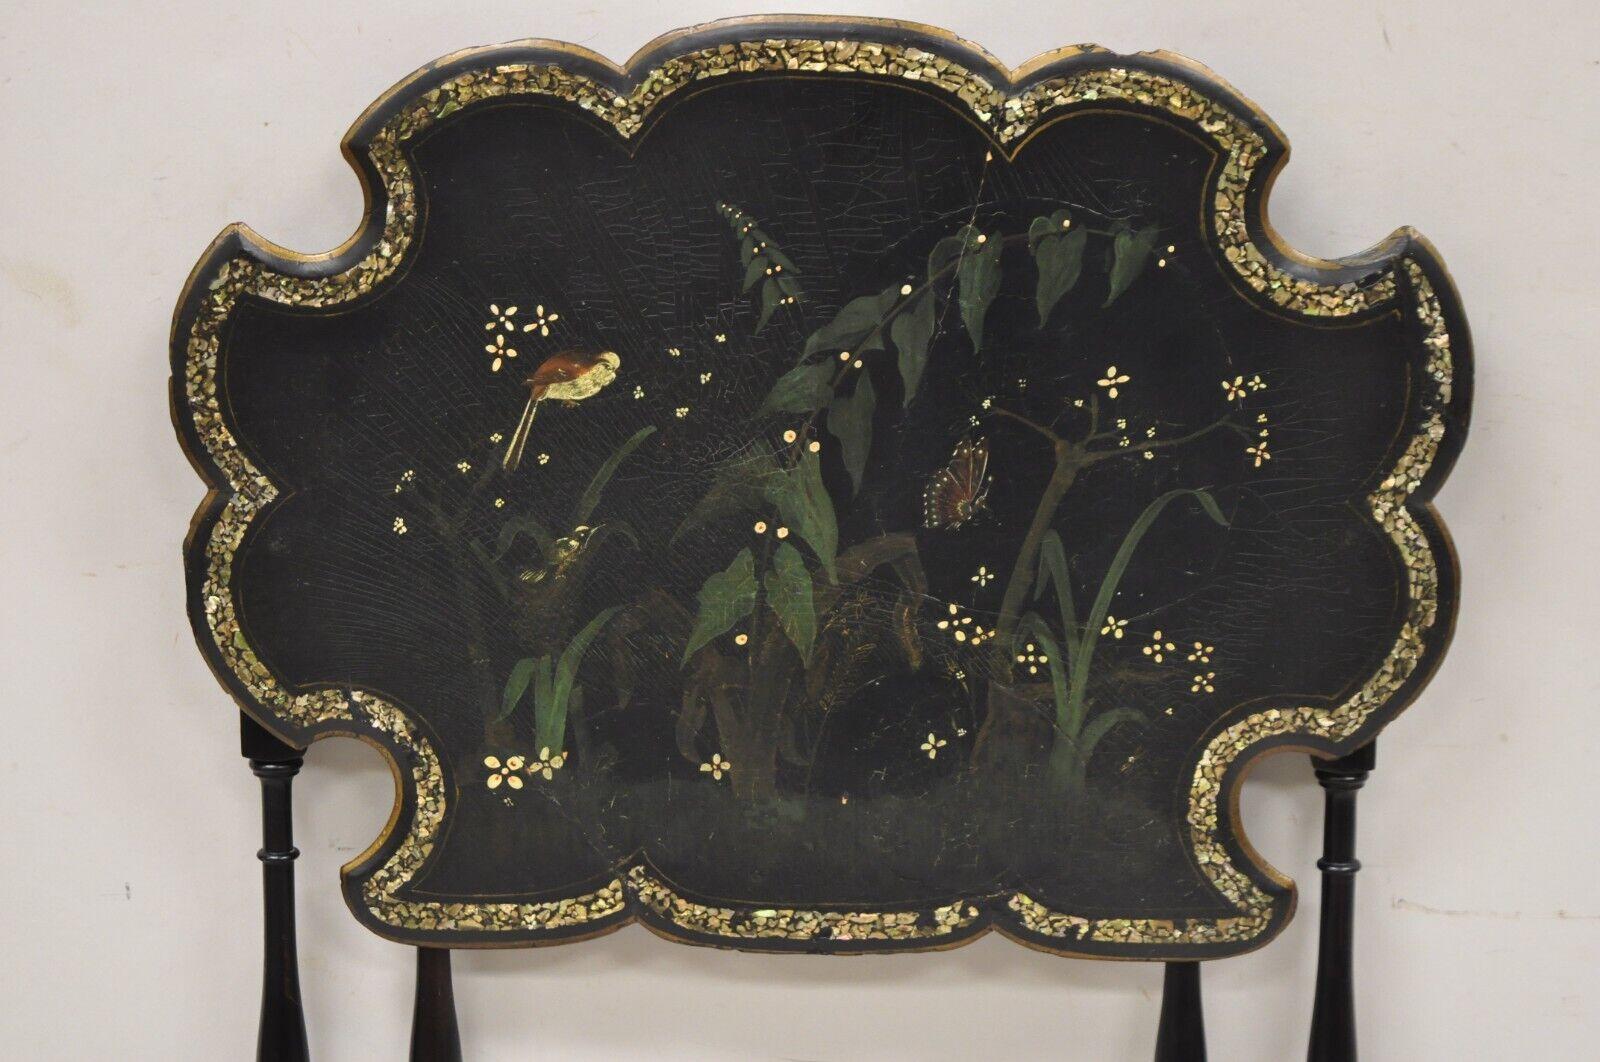 Victorian Black Ebonized Papier Mache Bird and Butterfly Painted Folding Side Table with Mother of Pearl Inlay Scalloped Top
Circa 19th Century.
Measurements: 
Open: 25